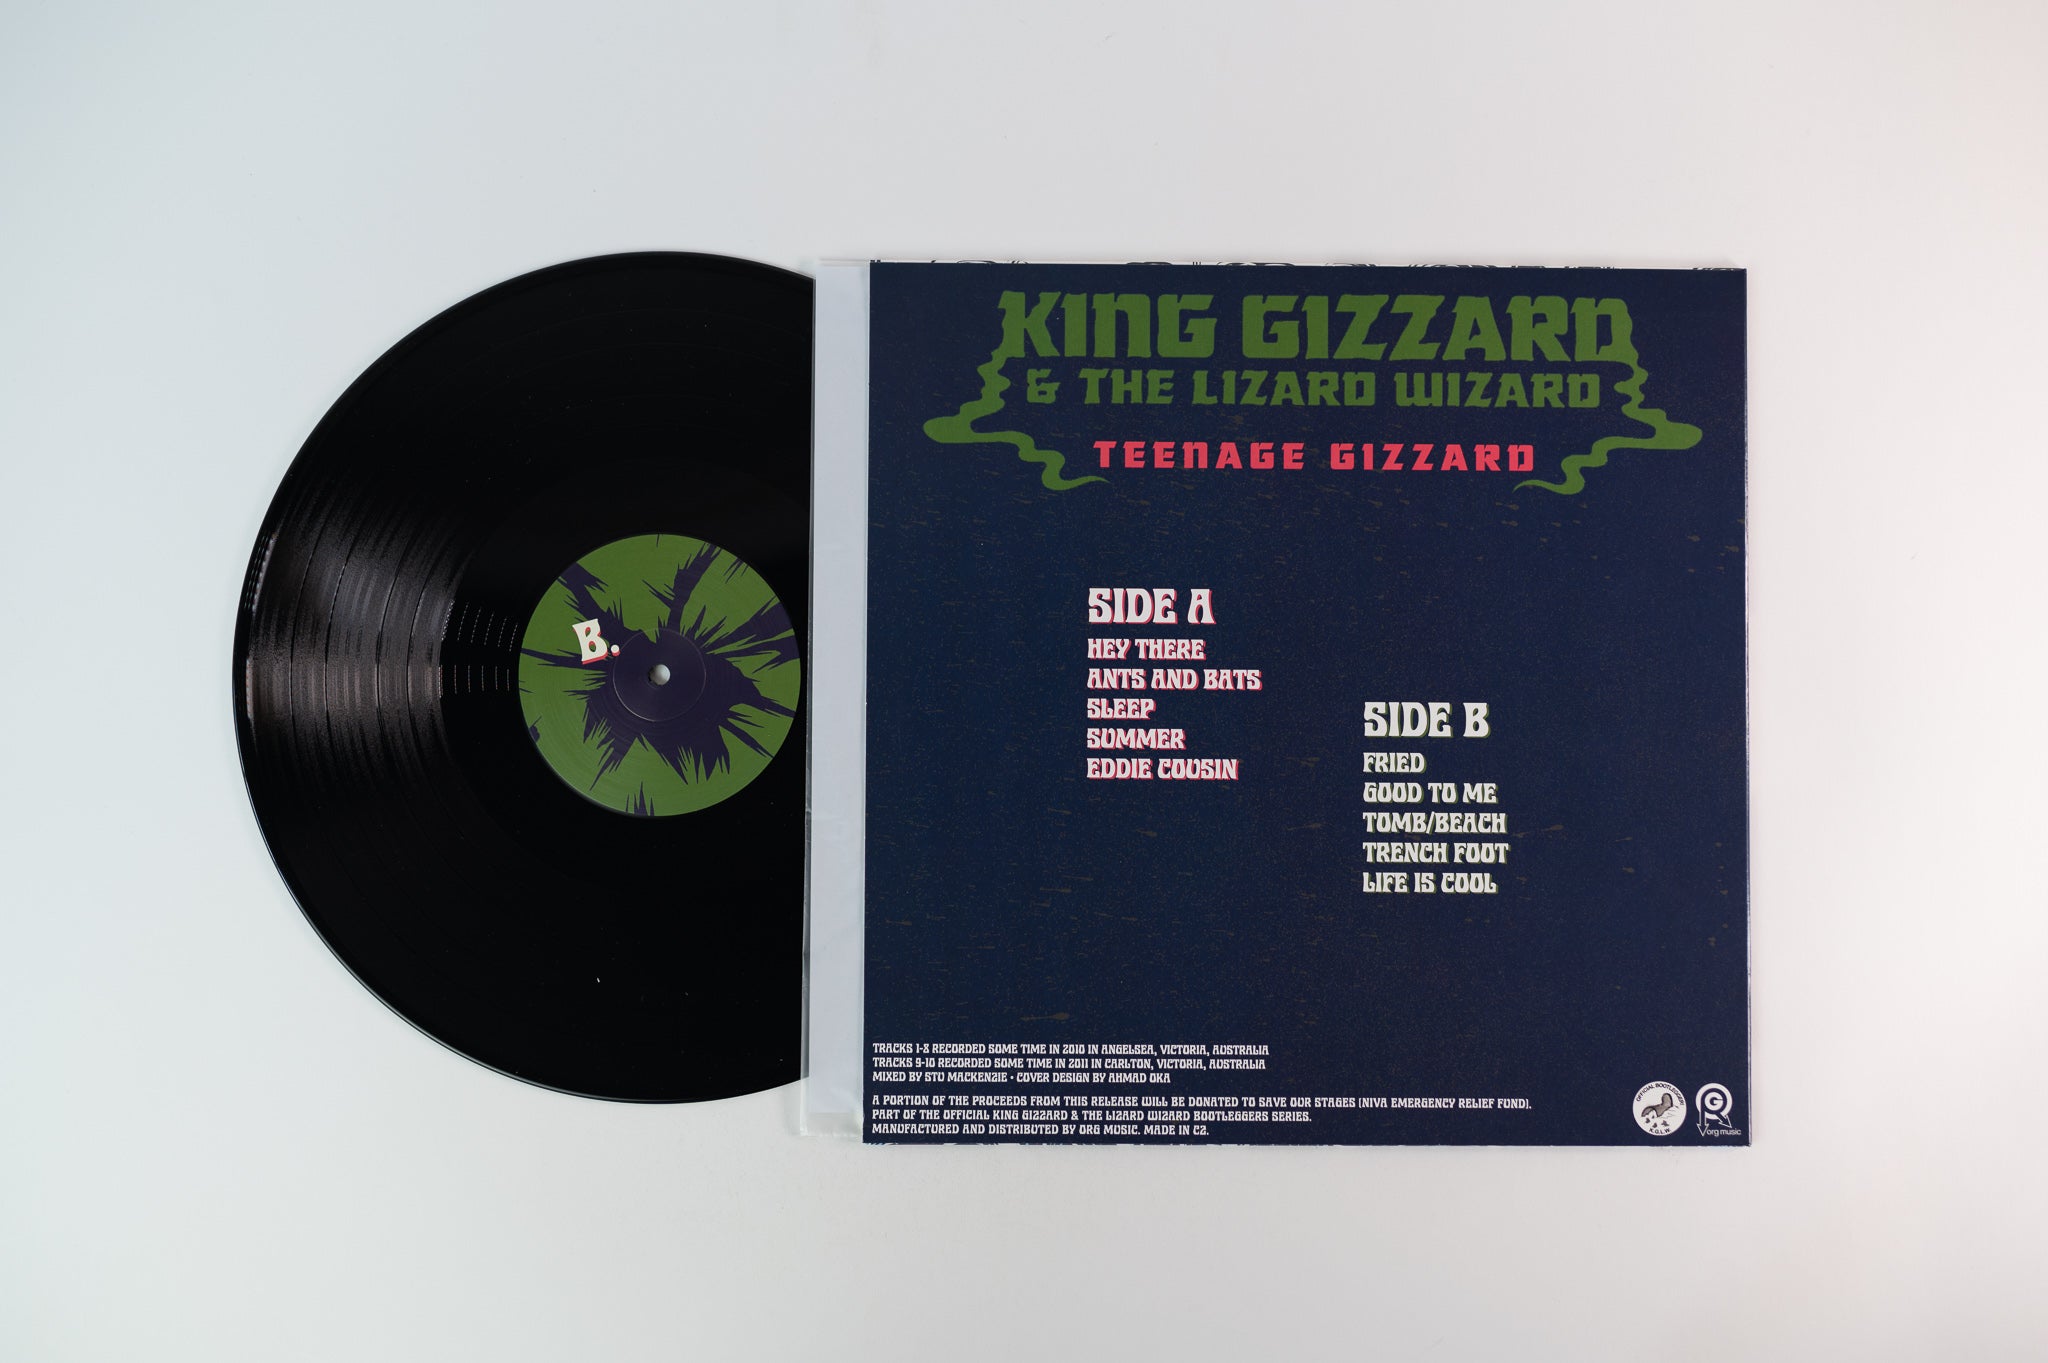 King Gizzard And The Lizard Wizard - Teenage Gizzard on ORG